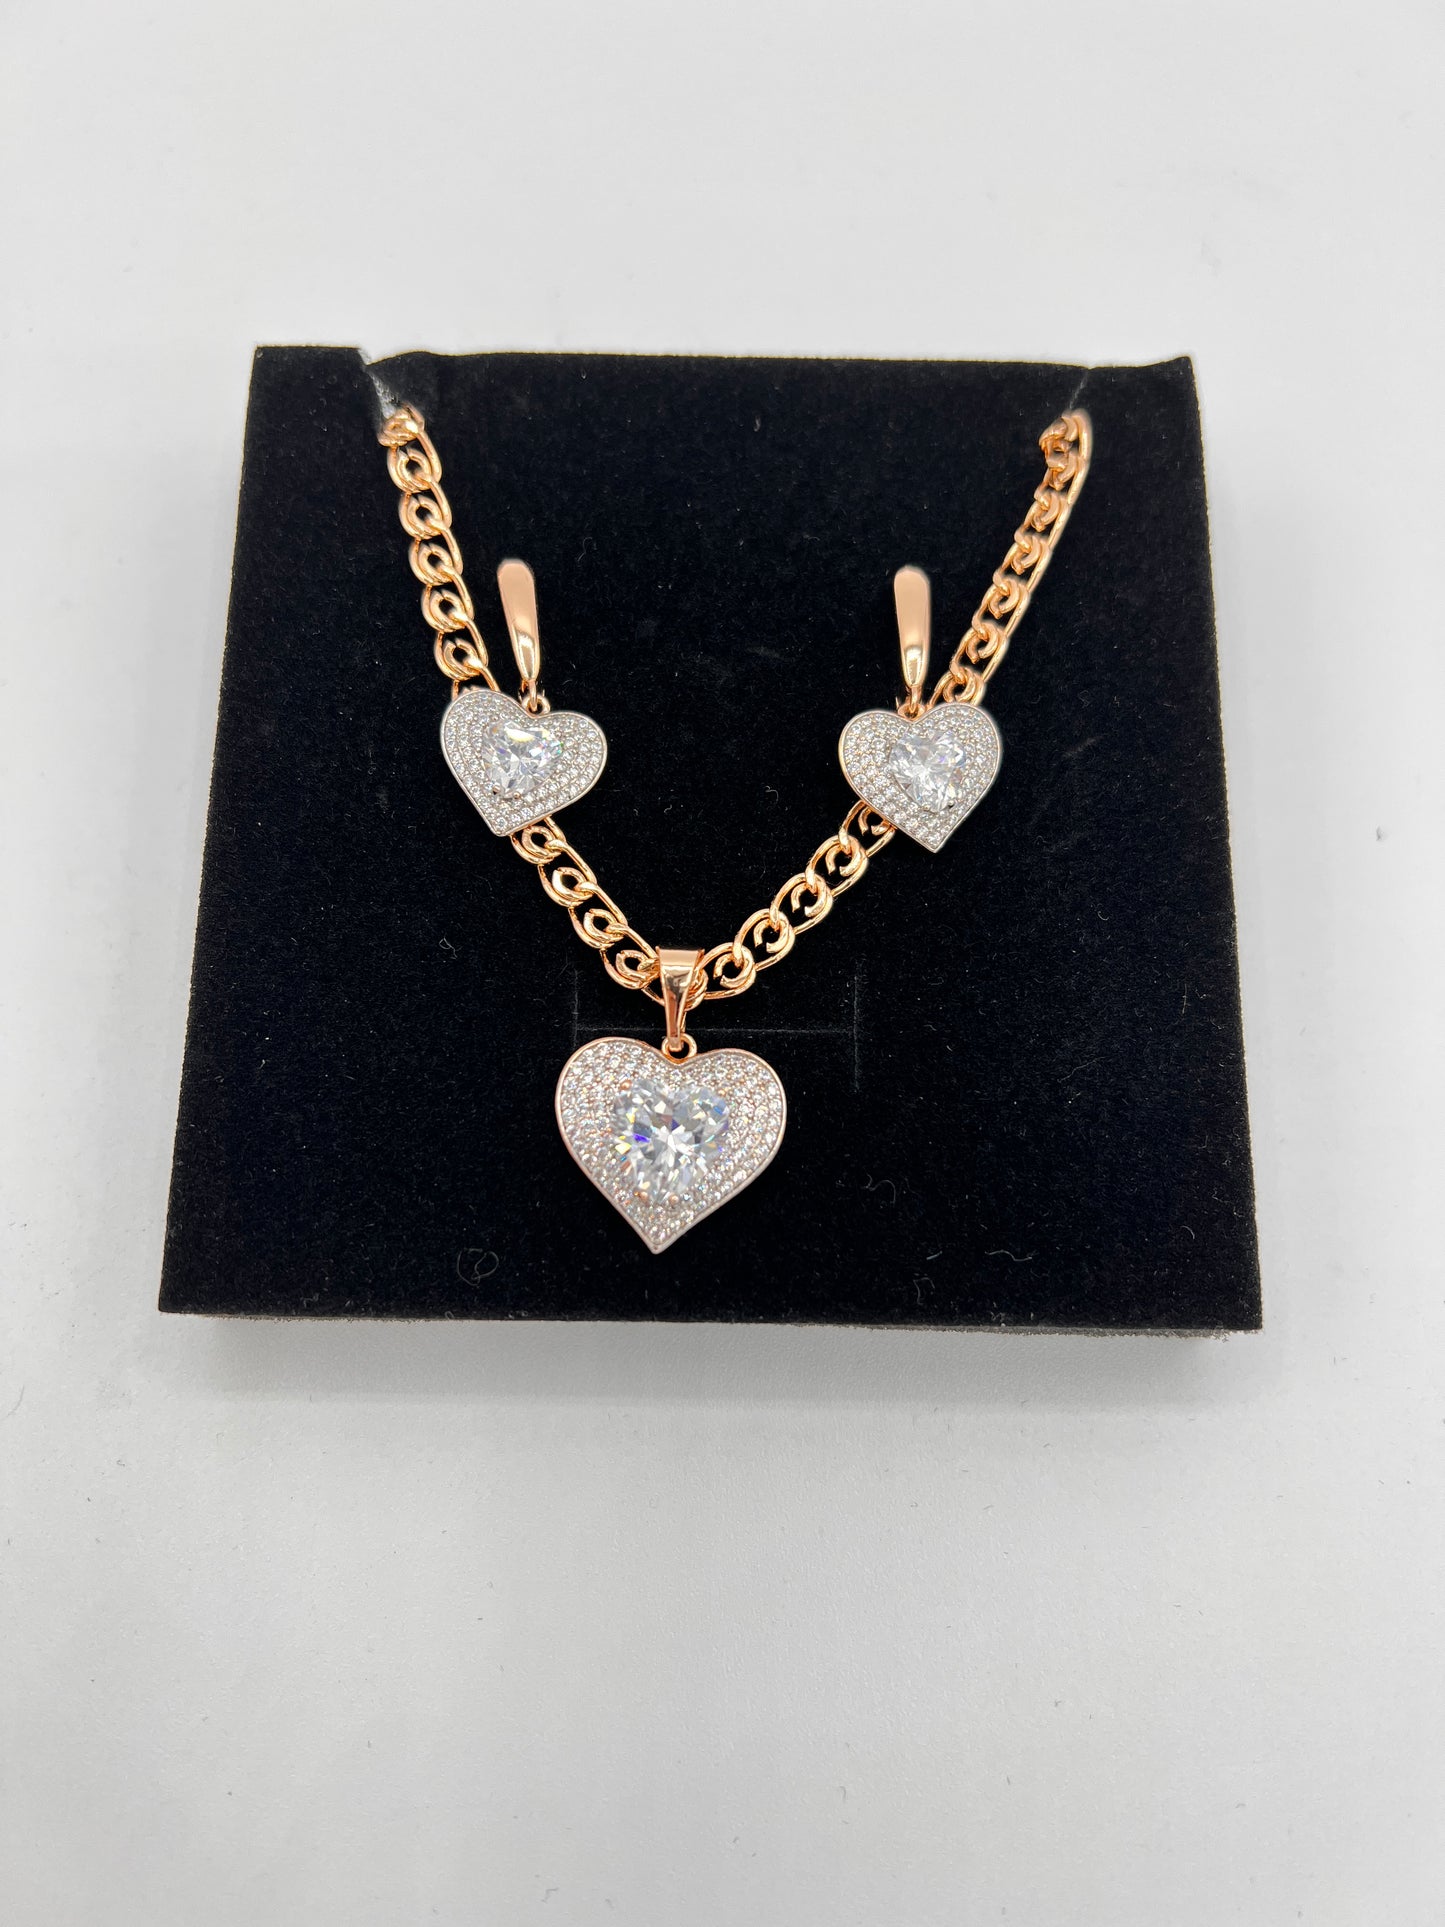 Big Heart Diamond Earrings and Necklace Gold-Plated Set